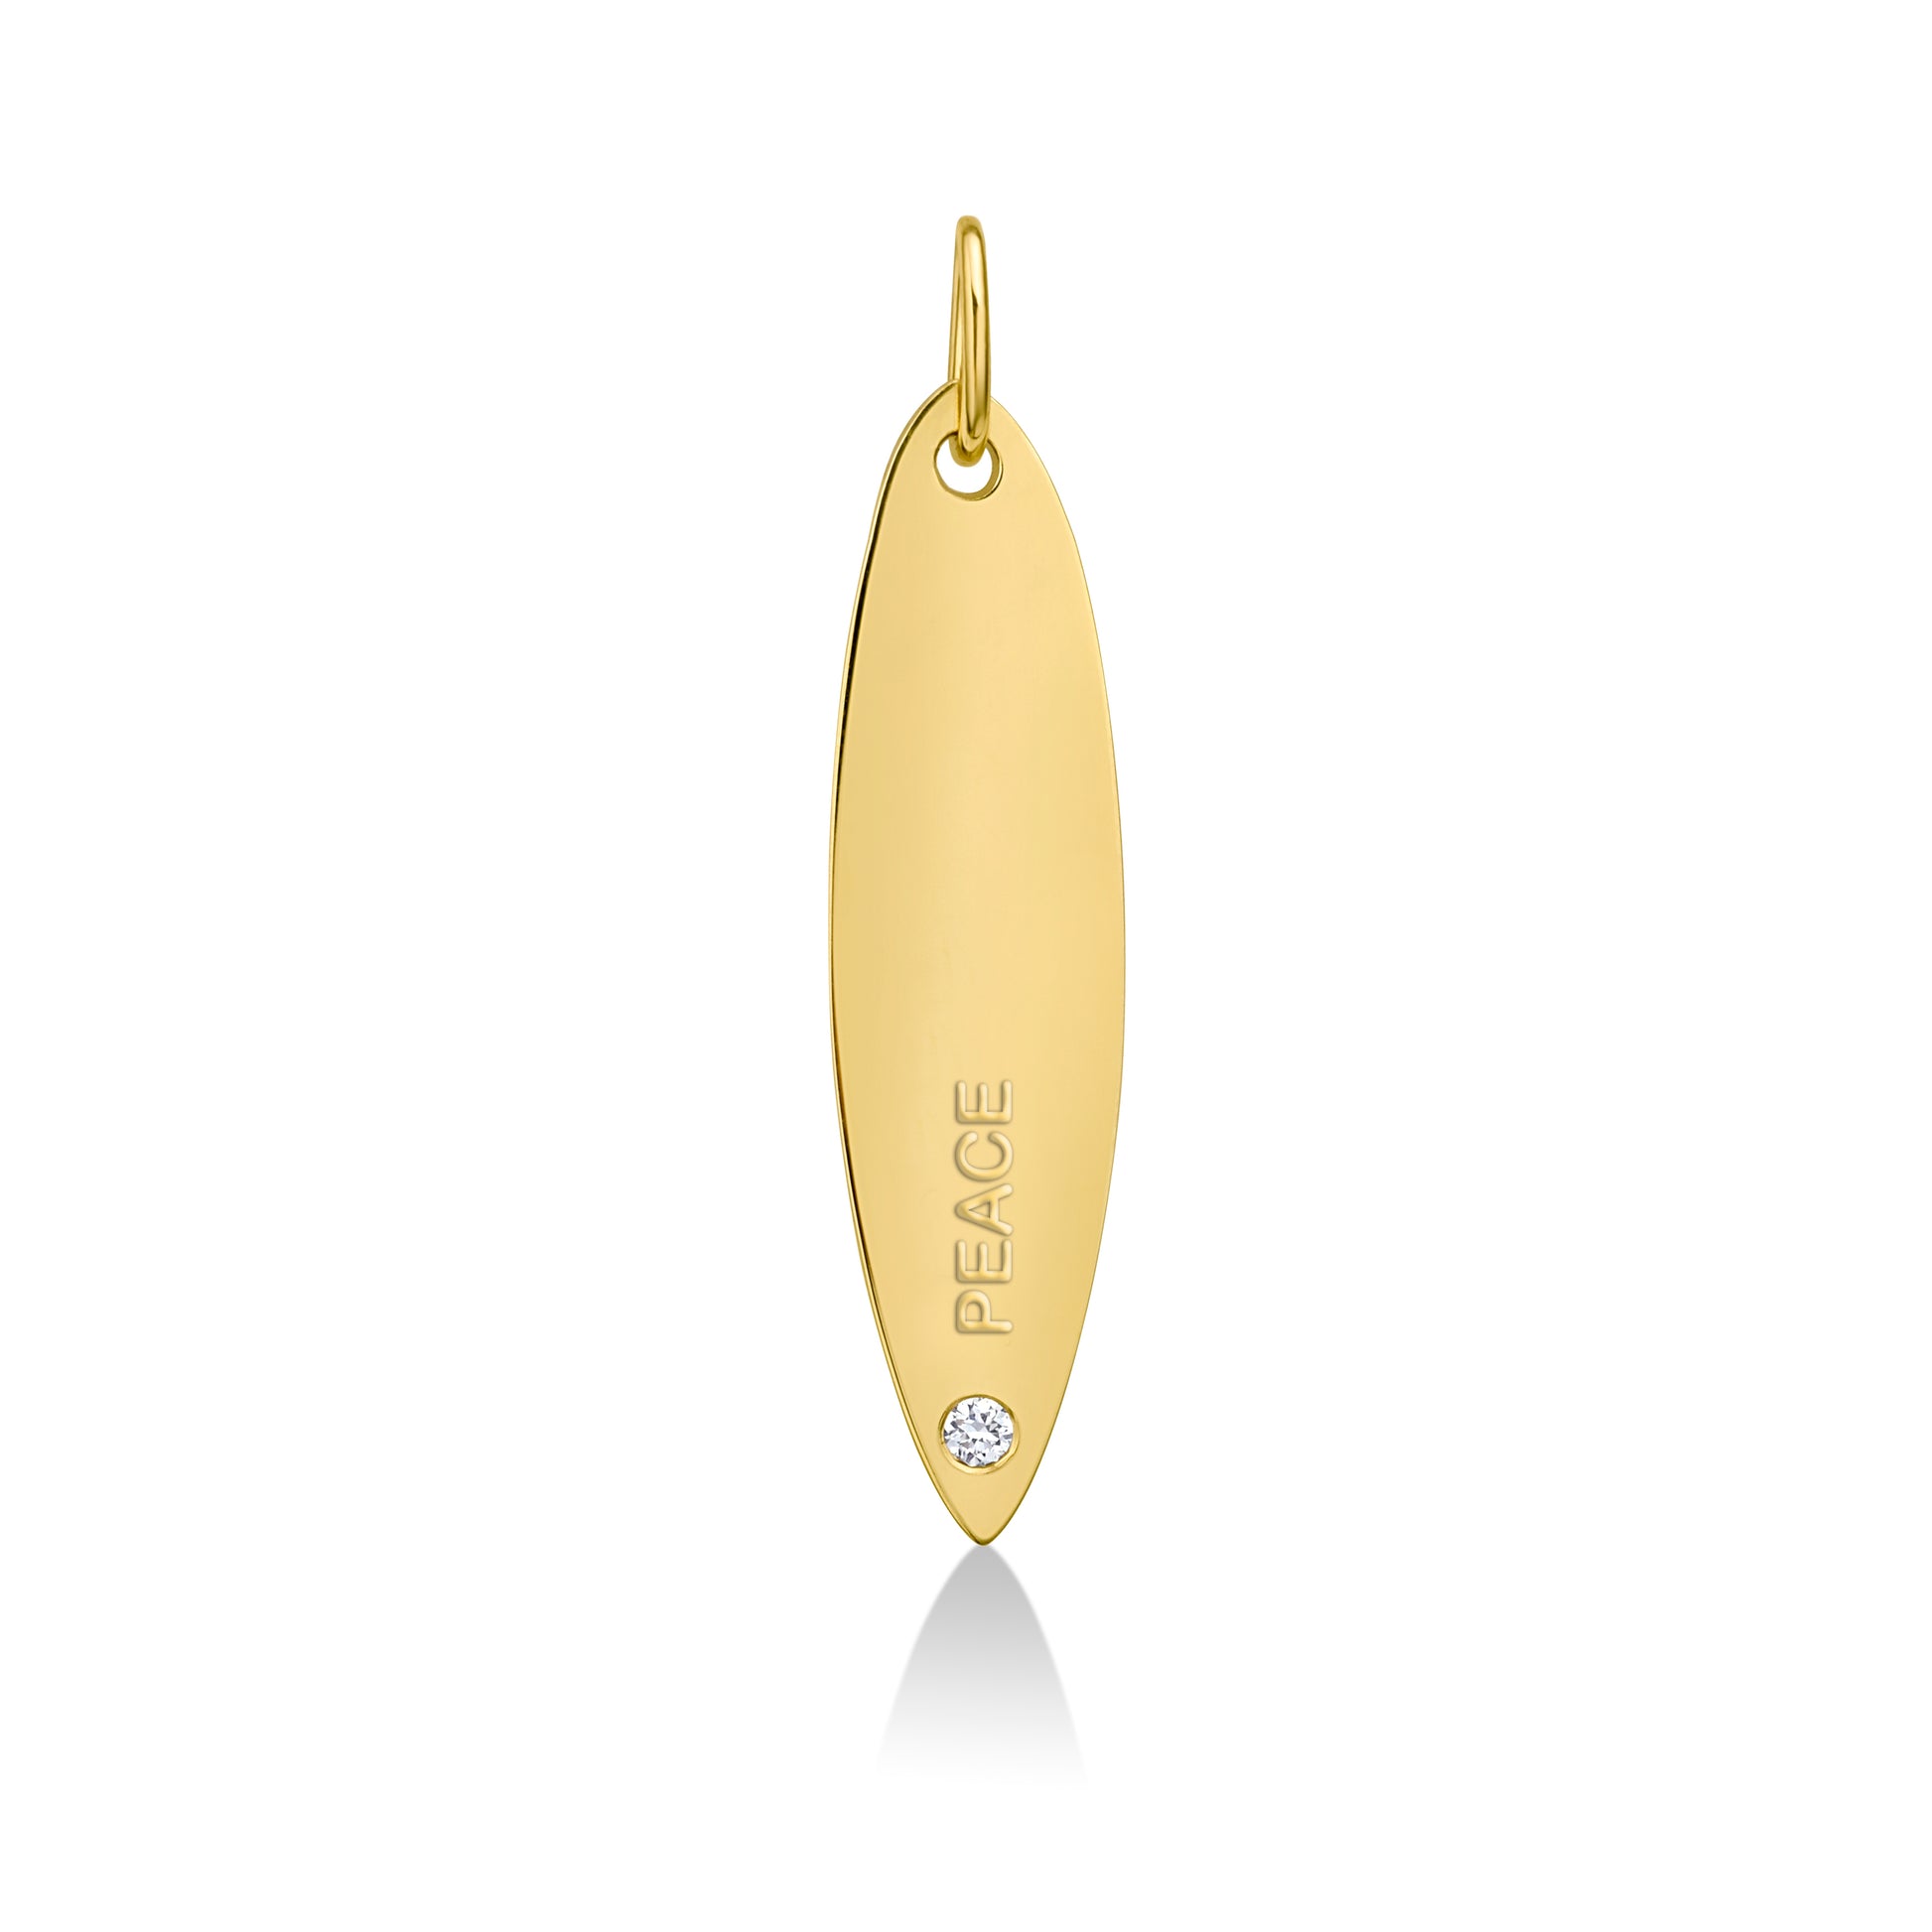 14k gold surfboard charm lock with PEACE engraved and diamond